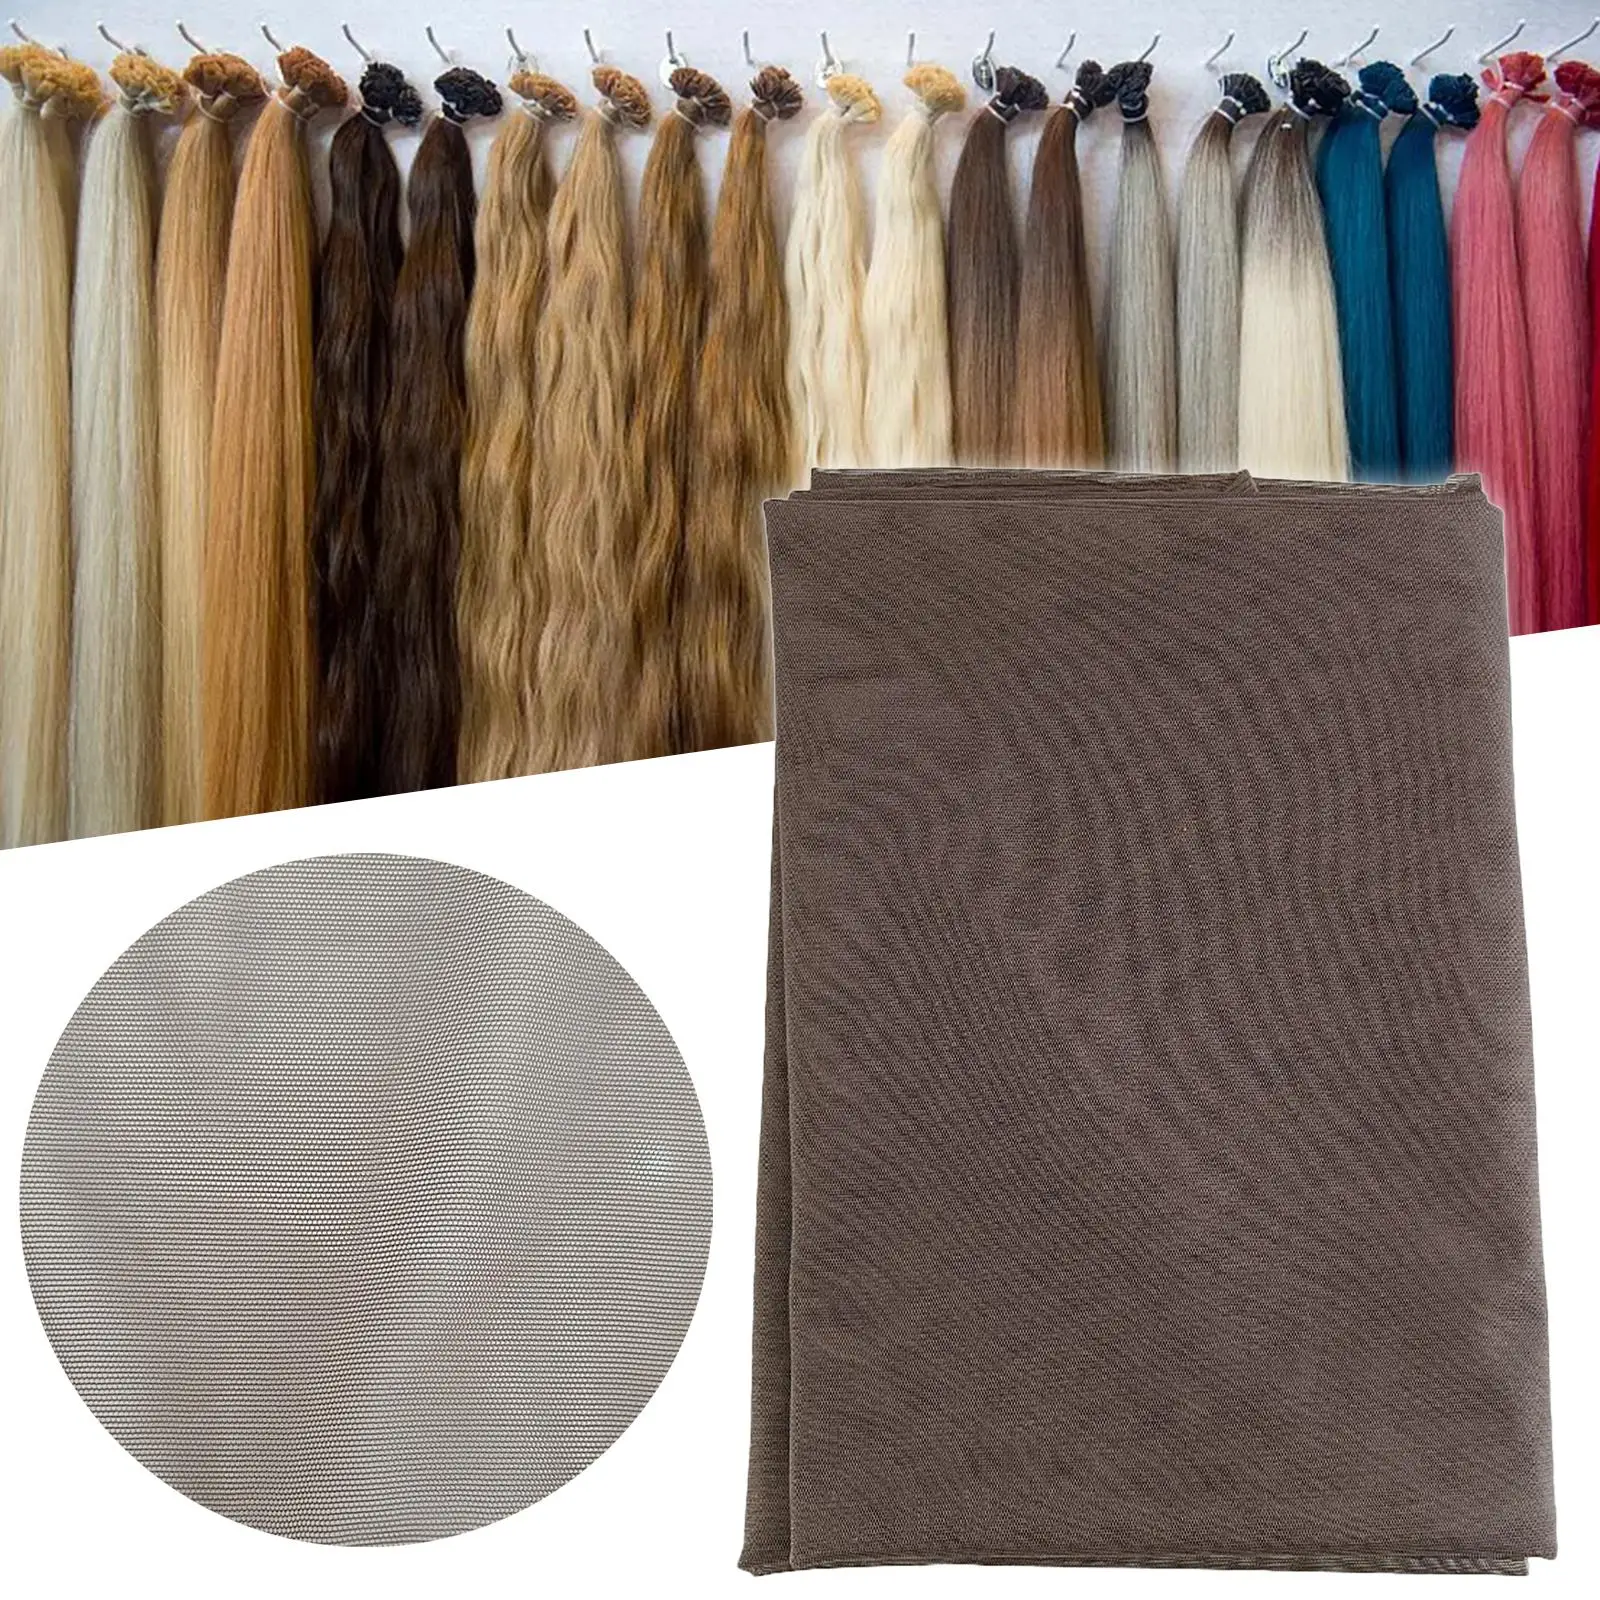 One Yard Brown Lace Net for Wigs Making & Repair High Performance Durable Soft 0.9x1.5M